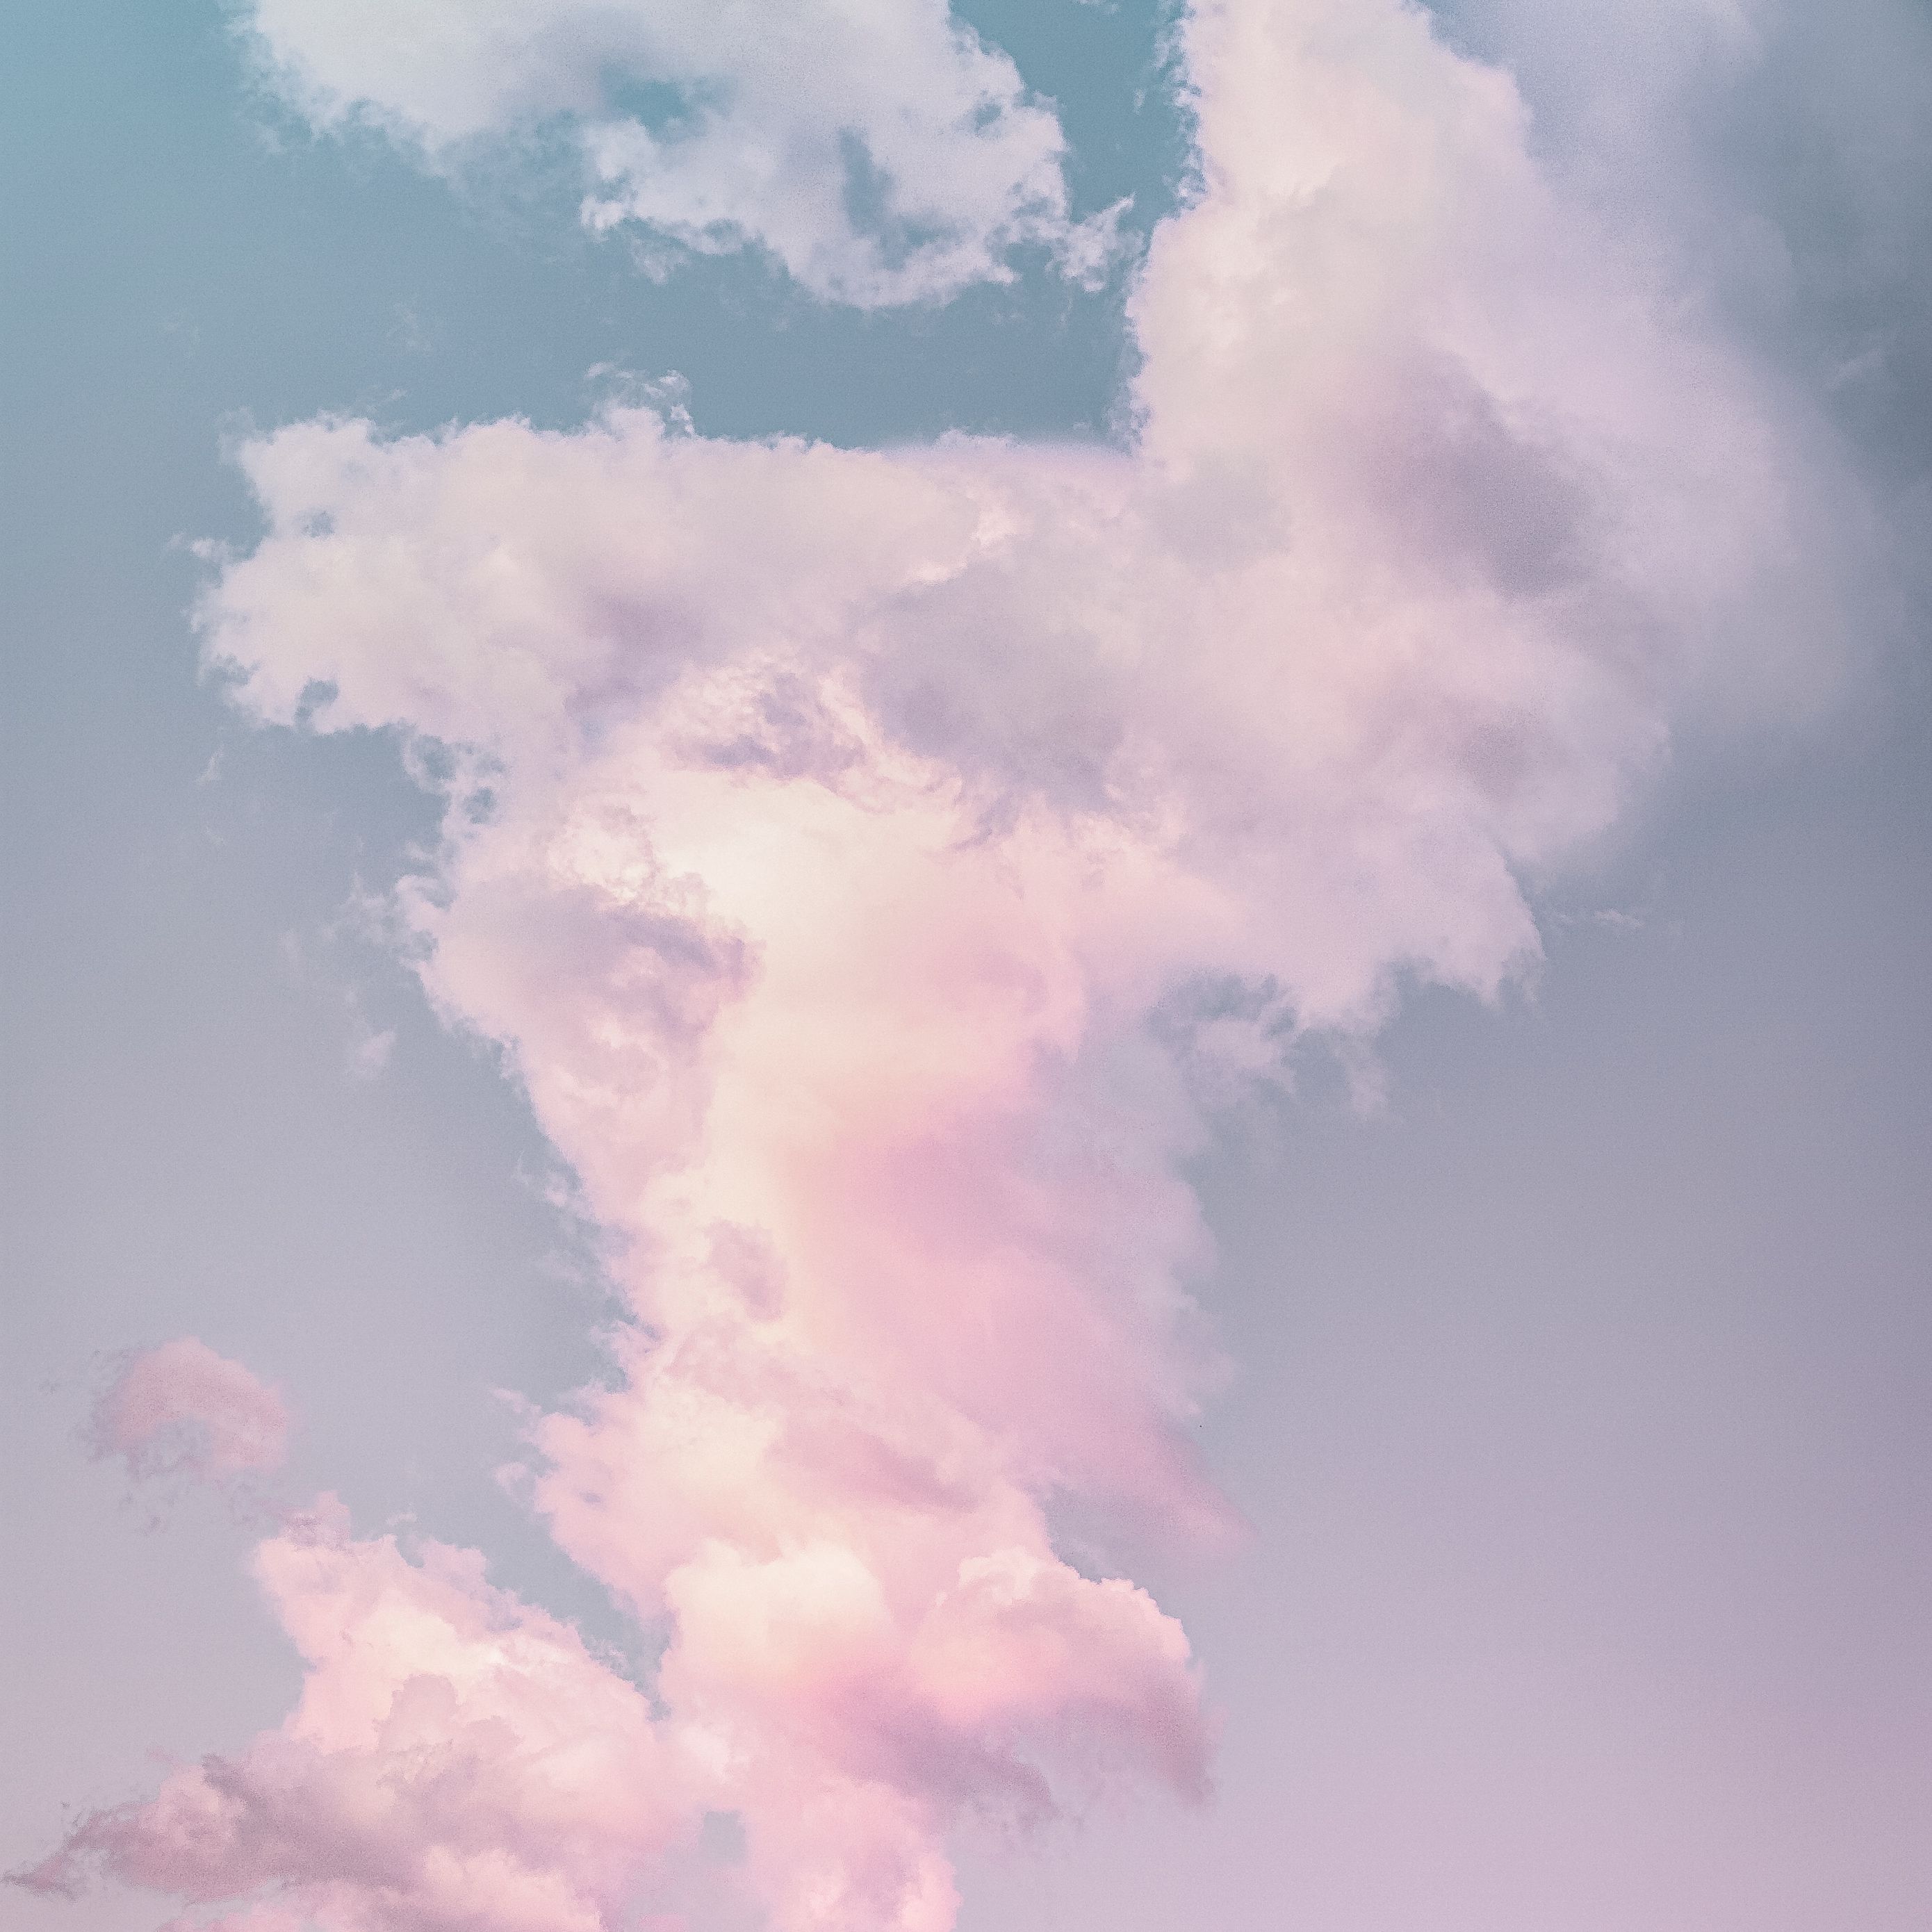 Download wallpaper 2780x2780 clouds, porous, sky, pastel ipad air, ipad air ipad ipad ipad mini ipad mini ipad mini ipad pro 9.7 for parallax HD background